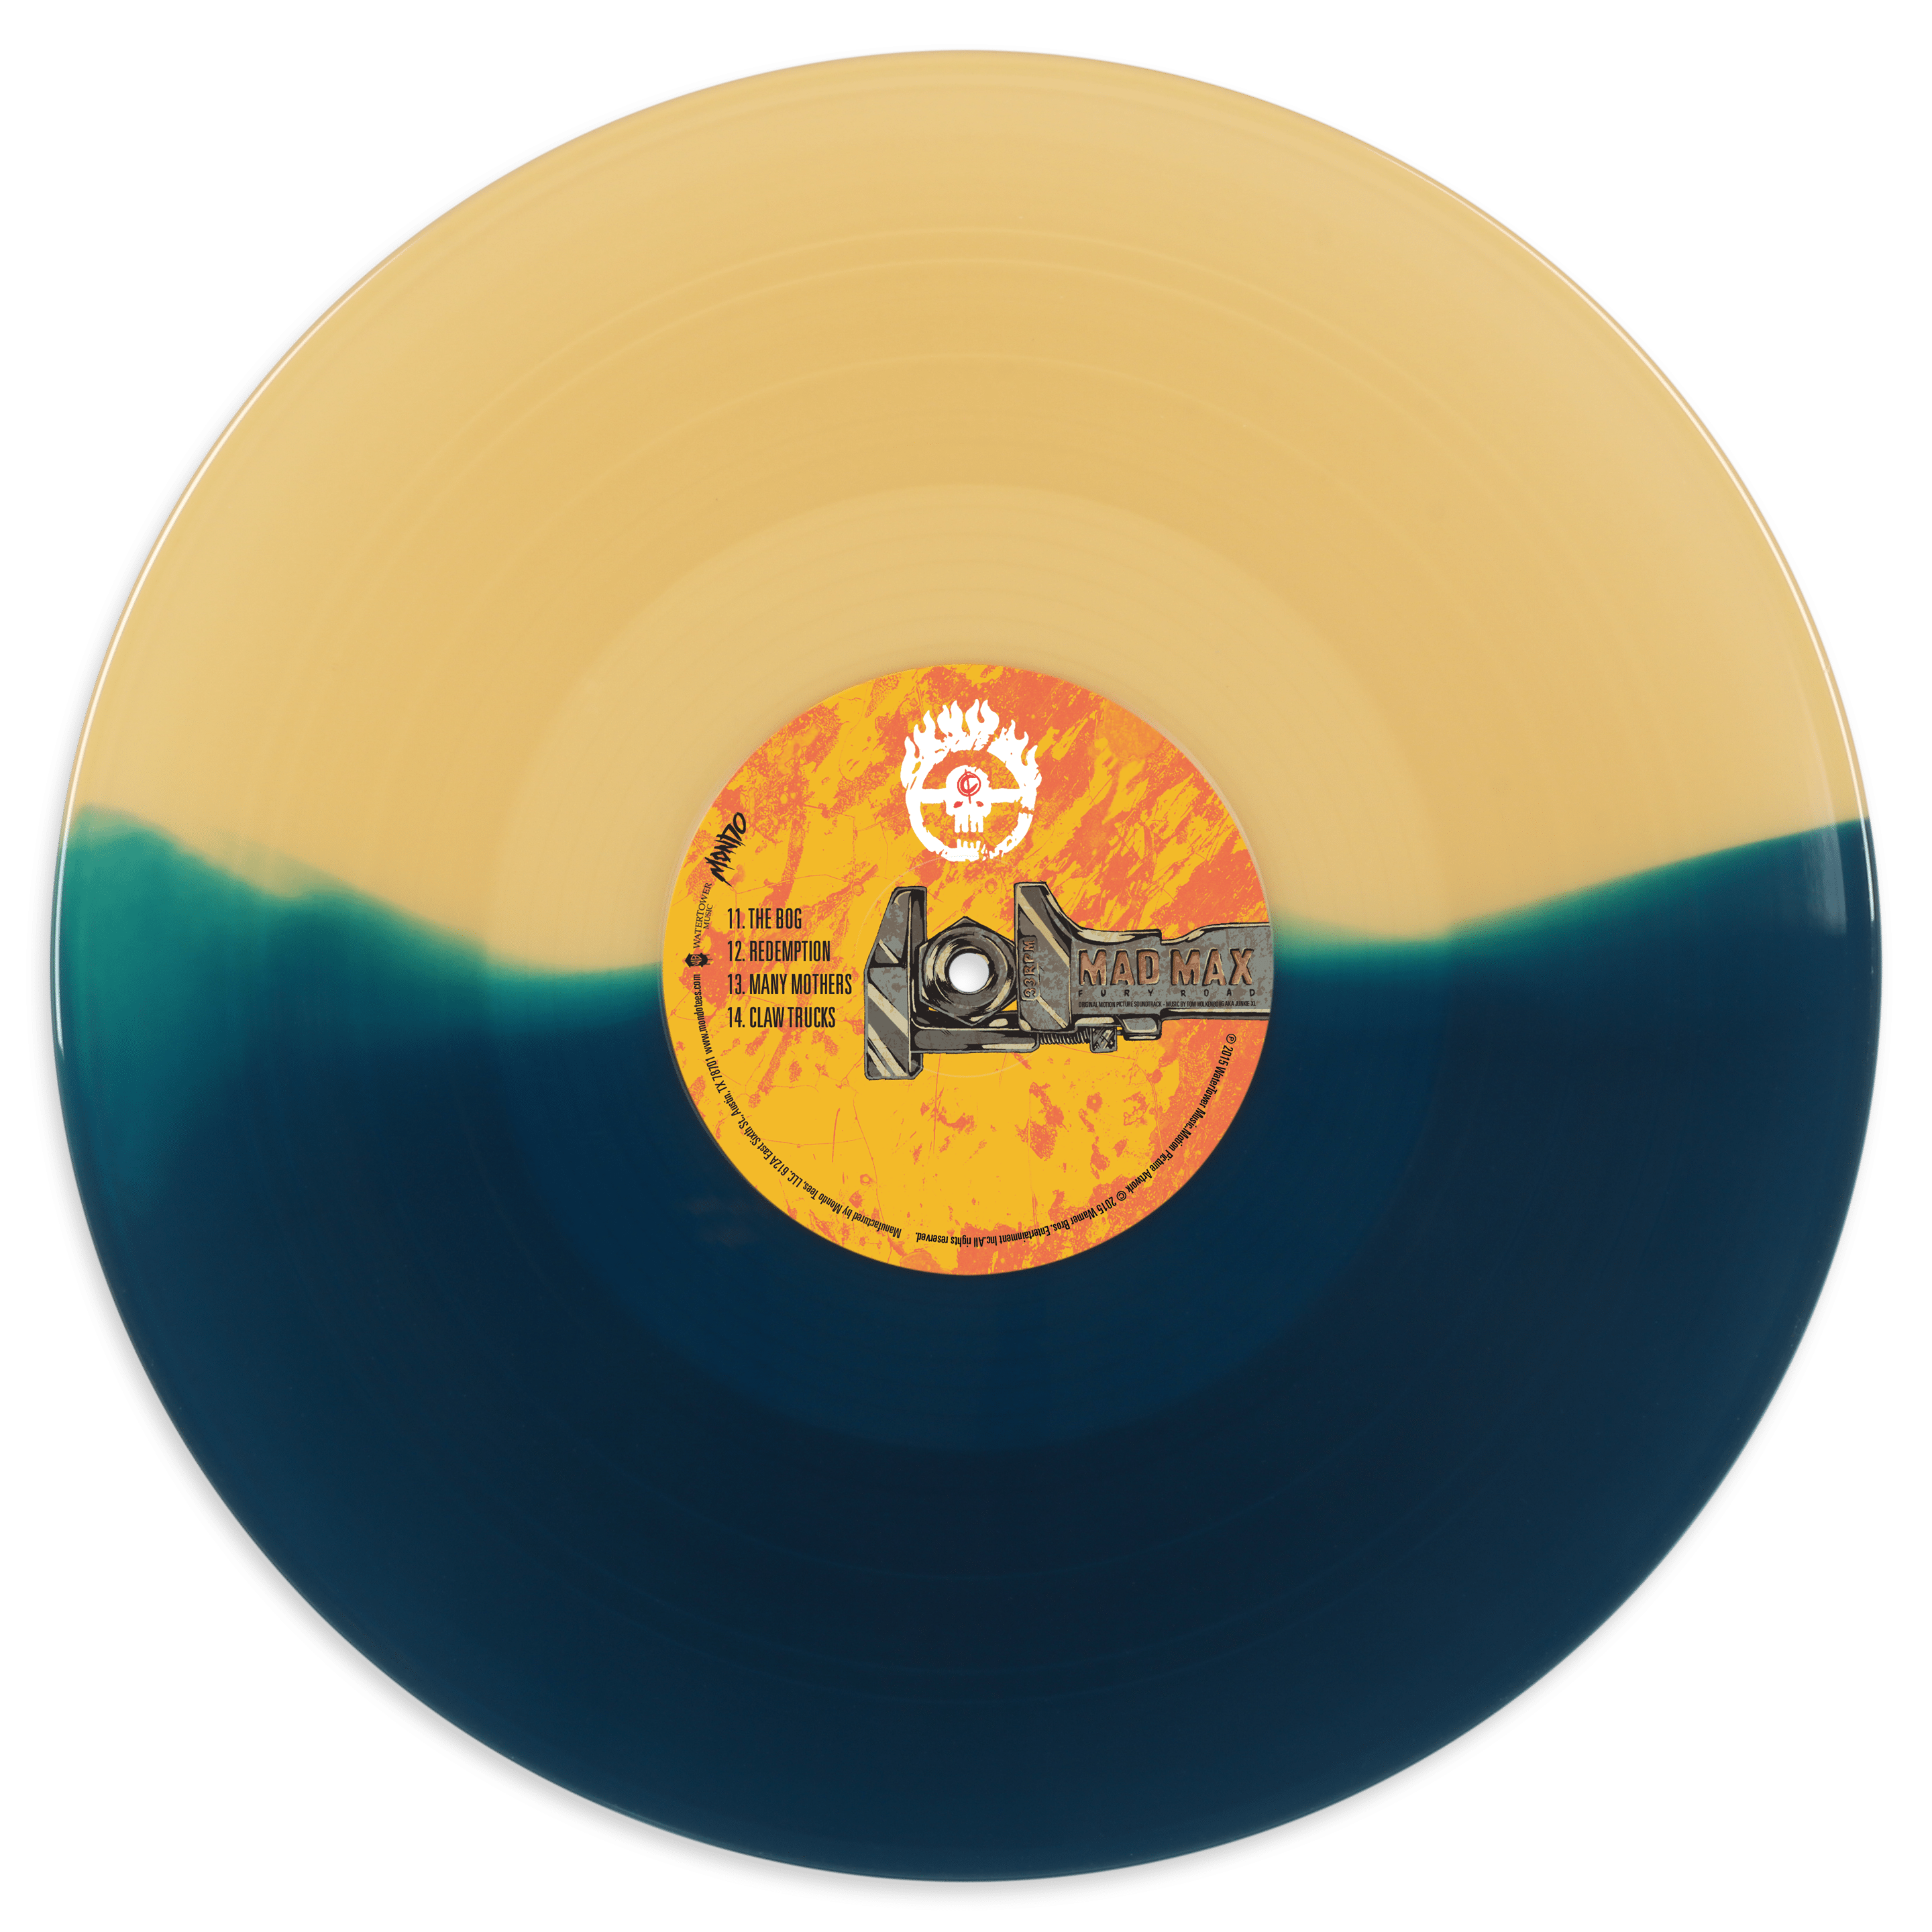 The Last of Us Part II: Covers And Rarities EP (1xLP Vinyl Record) [Bl